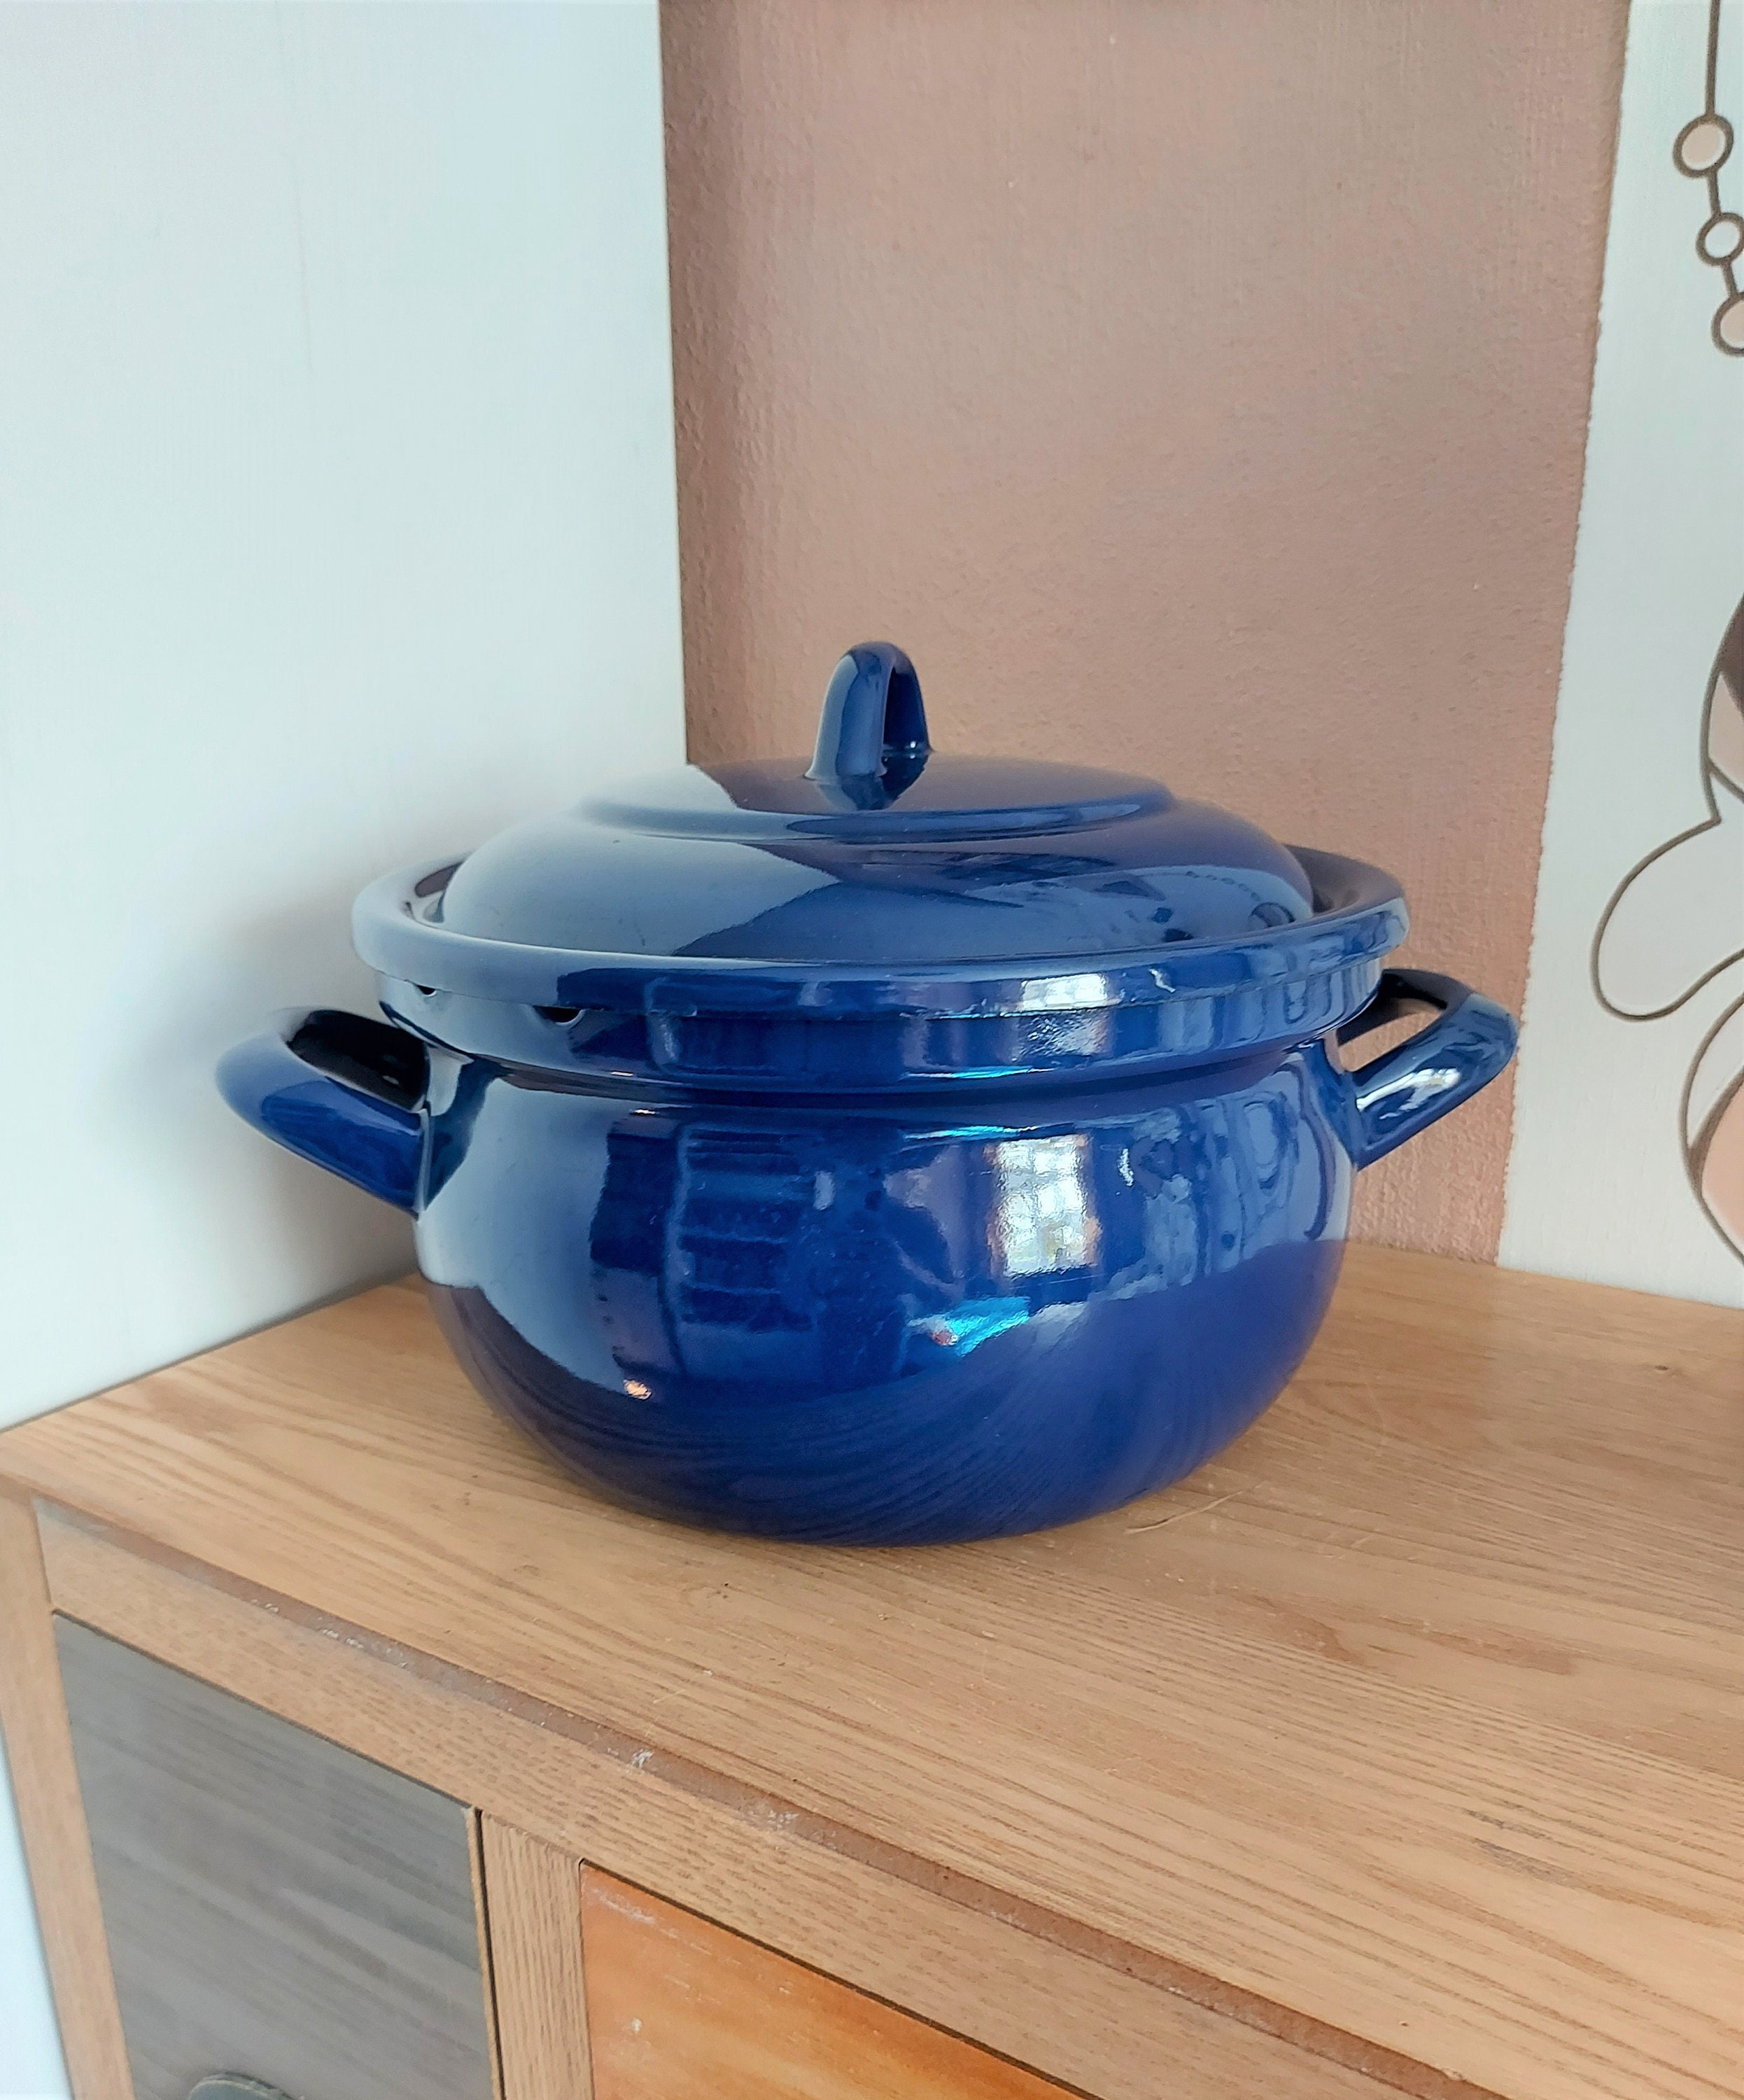 Vintage Enamelware Large Lidded Cooking Kettle Pot Light Blue Teal Color  With Black Trim Accents 6 in Tall by 10 in Diameter UNIQUE COLOR 